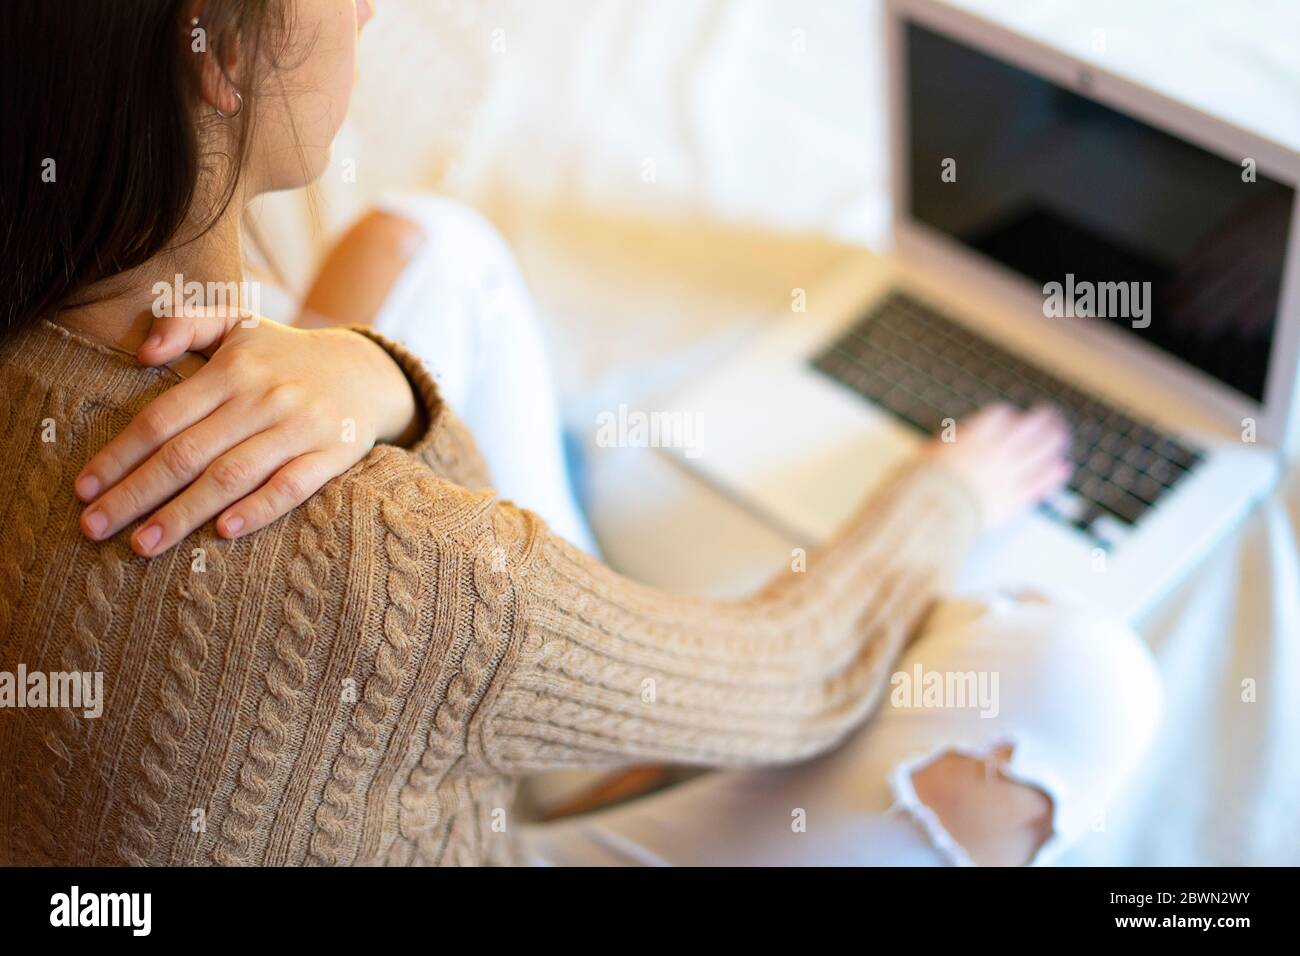 office worker with back pain from working with the computer. Ergonomics at work. Stock Photo